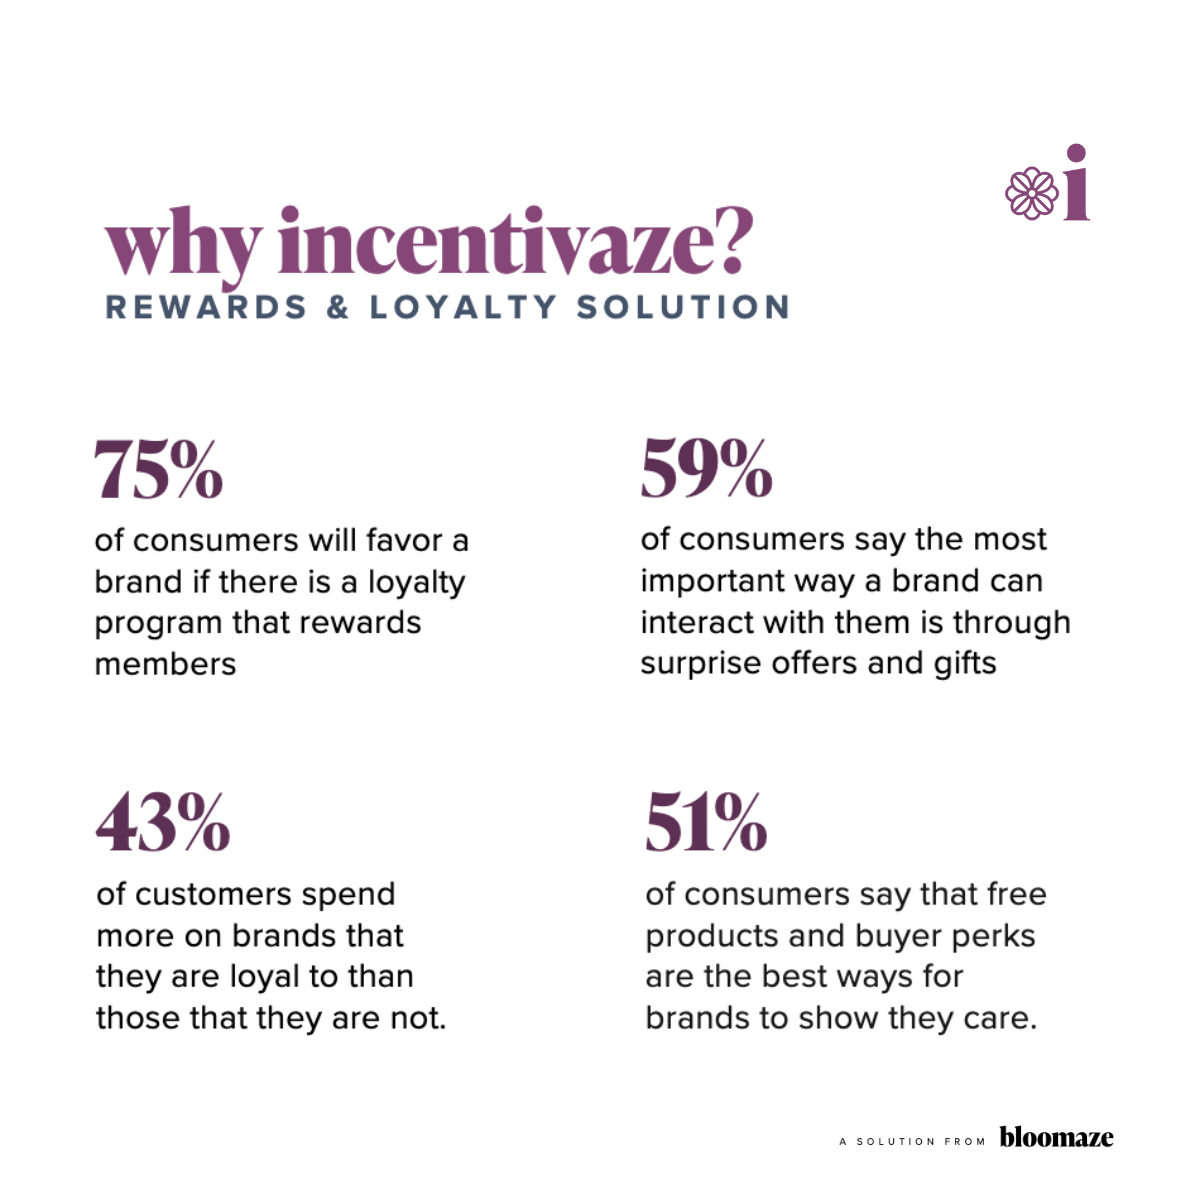 Why Incentivaze? Here's a few reasons